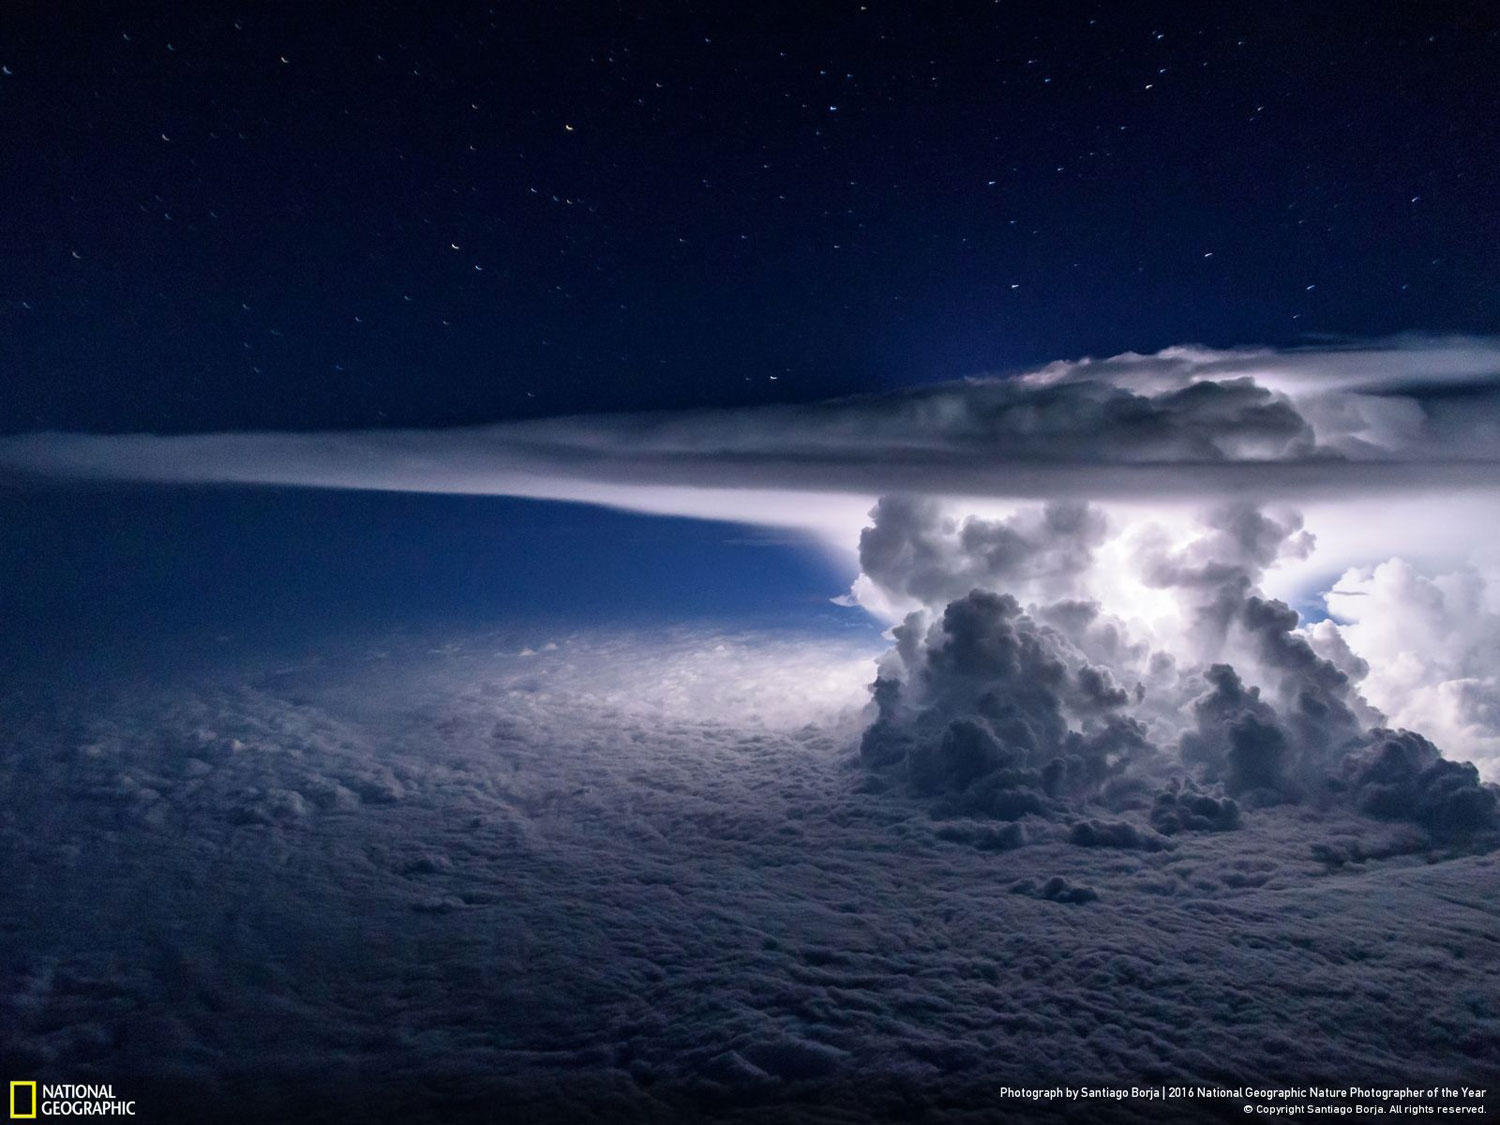 Pacific Storm // Photo and caption by Santiago Borja